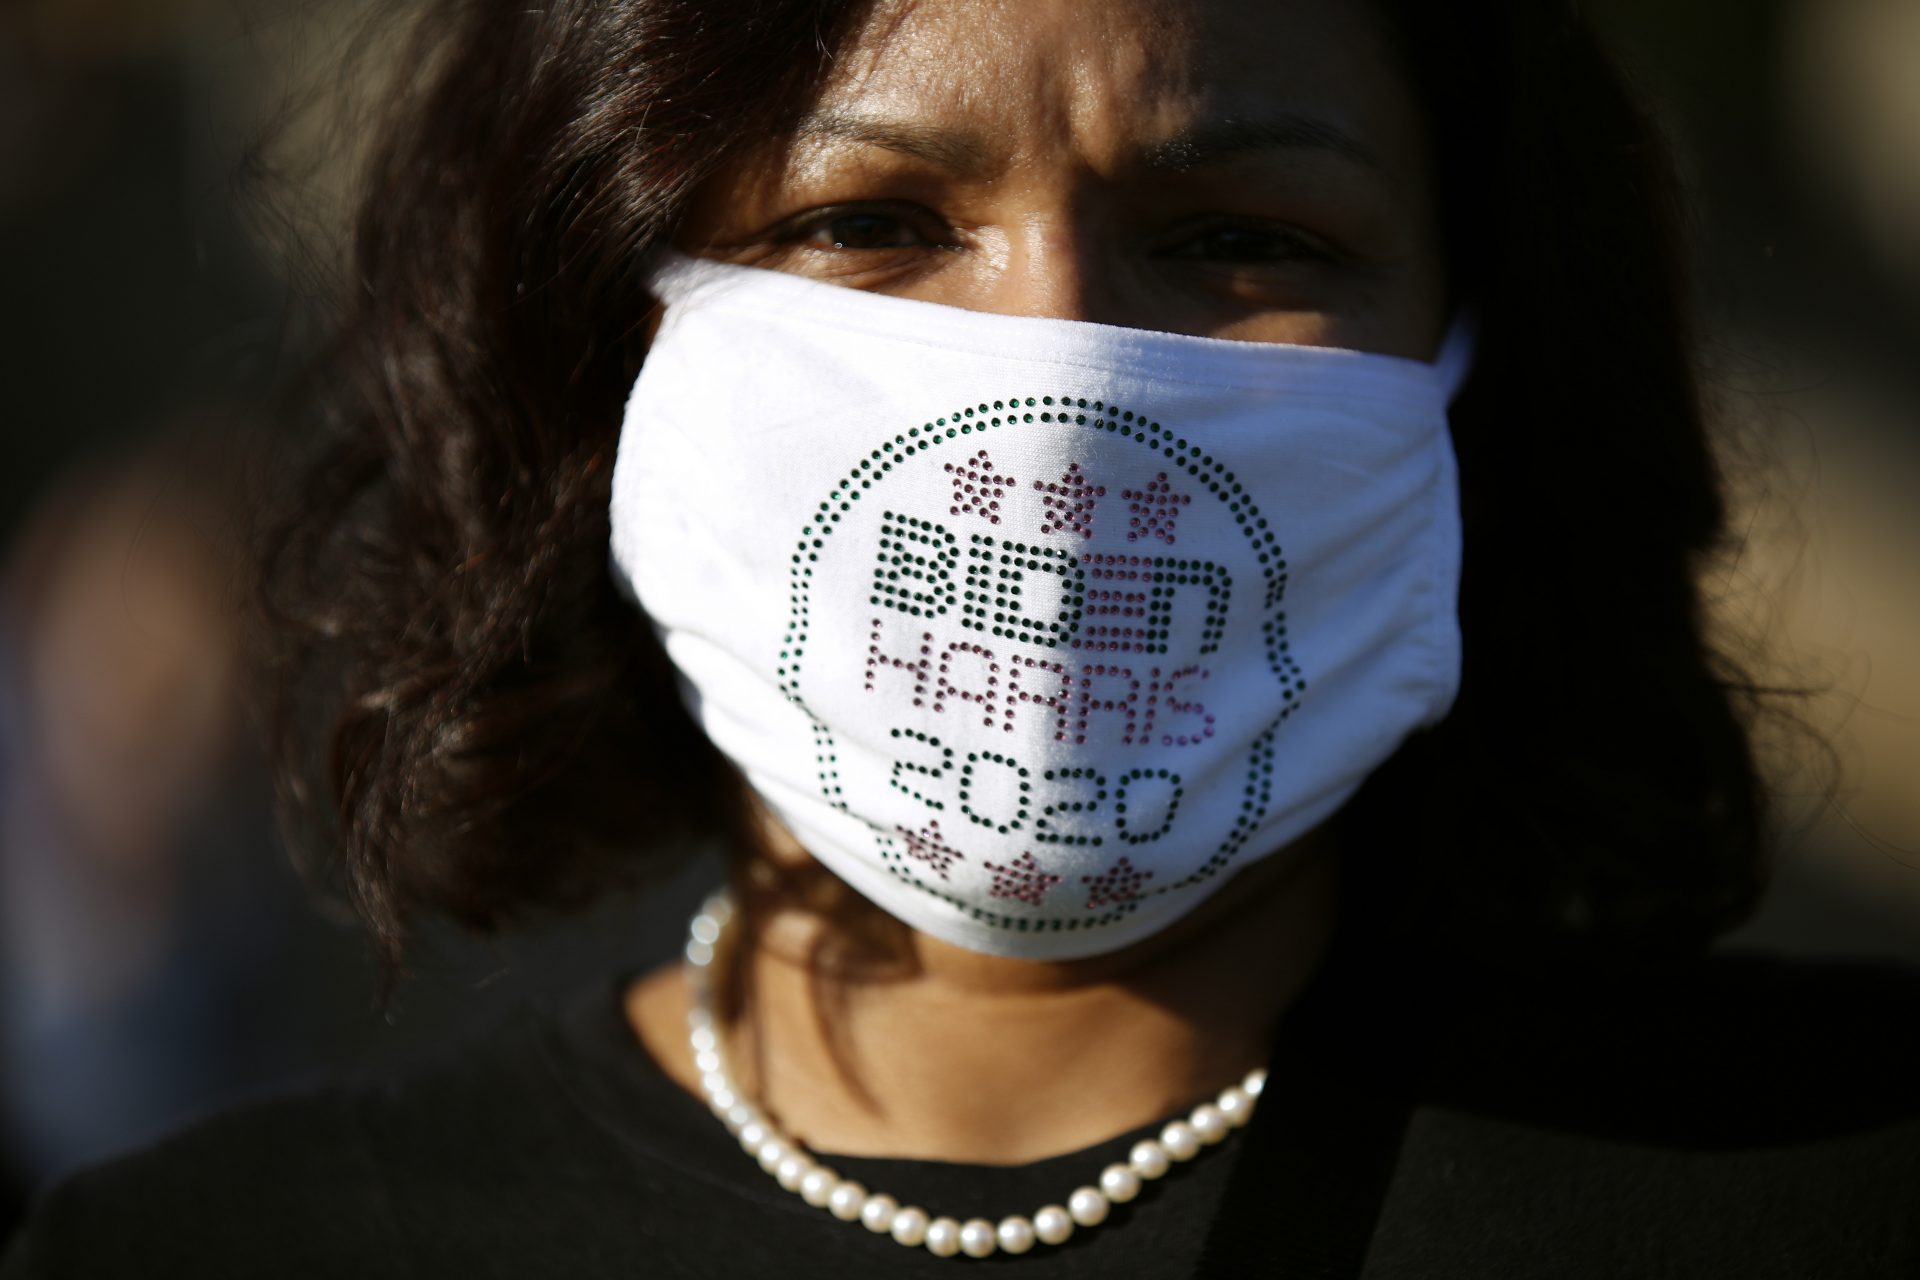 Candice Richardson, a native of Trinidad who grew up in New York and lives in Philadelphia, wears a protective mask supporting President-elect Joe Biden and Vice President-elect Kamala Harris during a celebration outside the Philadelphia Museum of Art, Sunday, Nov. 8, 2020, in Philadelphia.